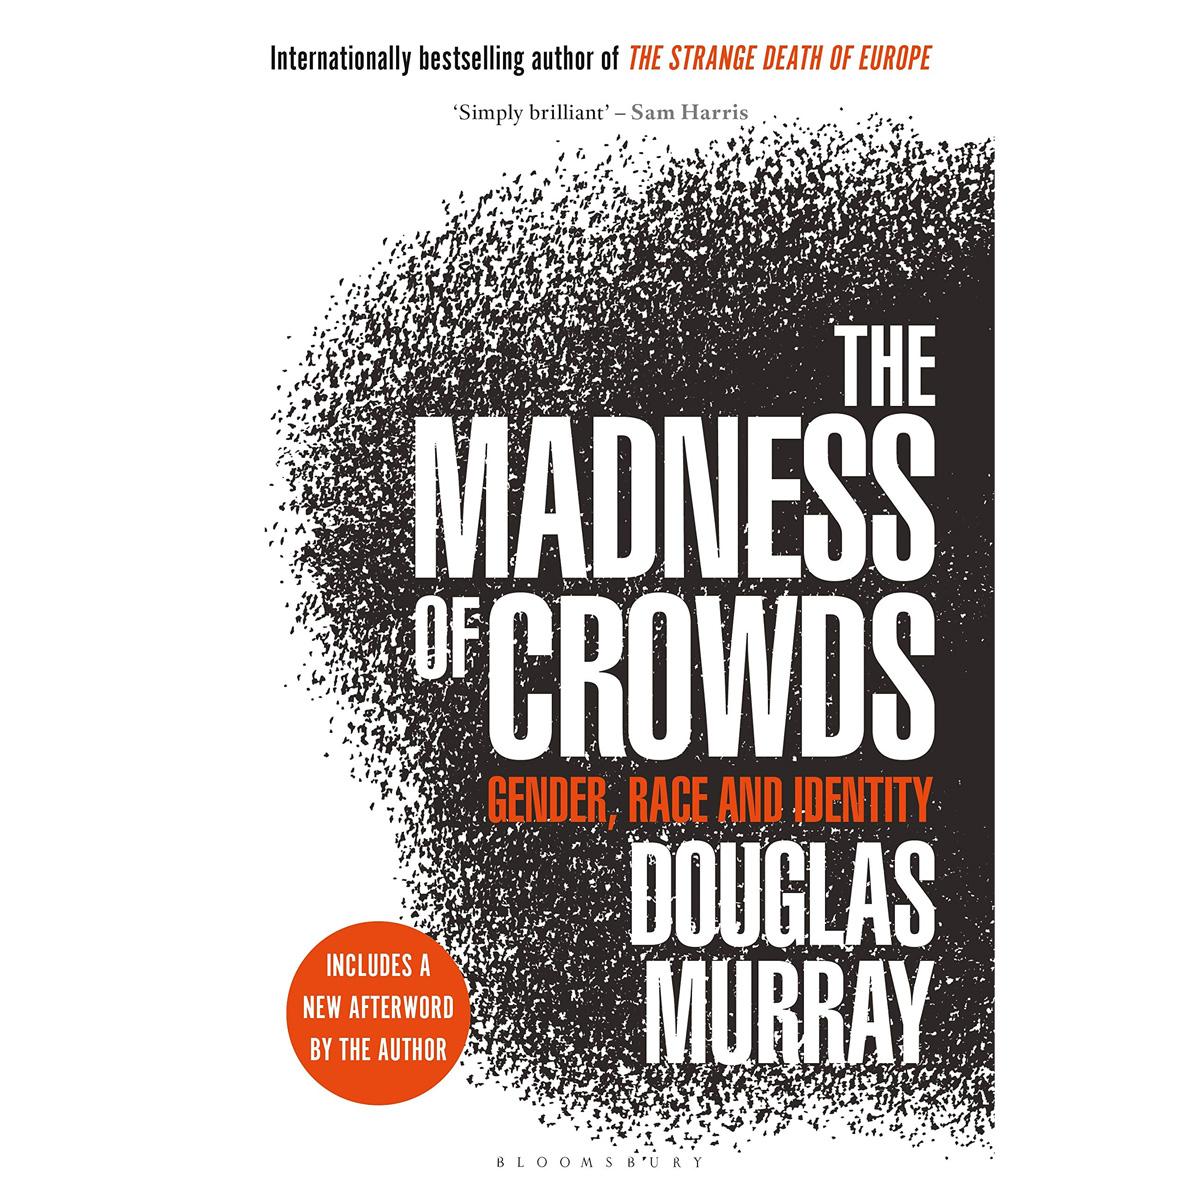 The Madness of Crowds Gender Race and Identity eBook for $1.99